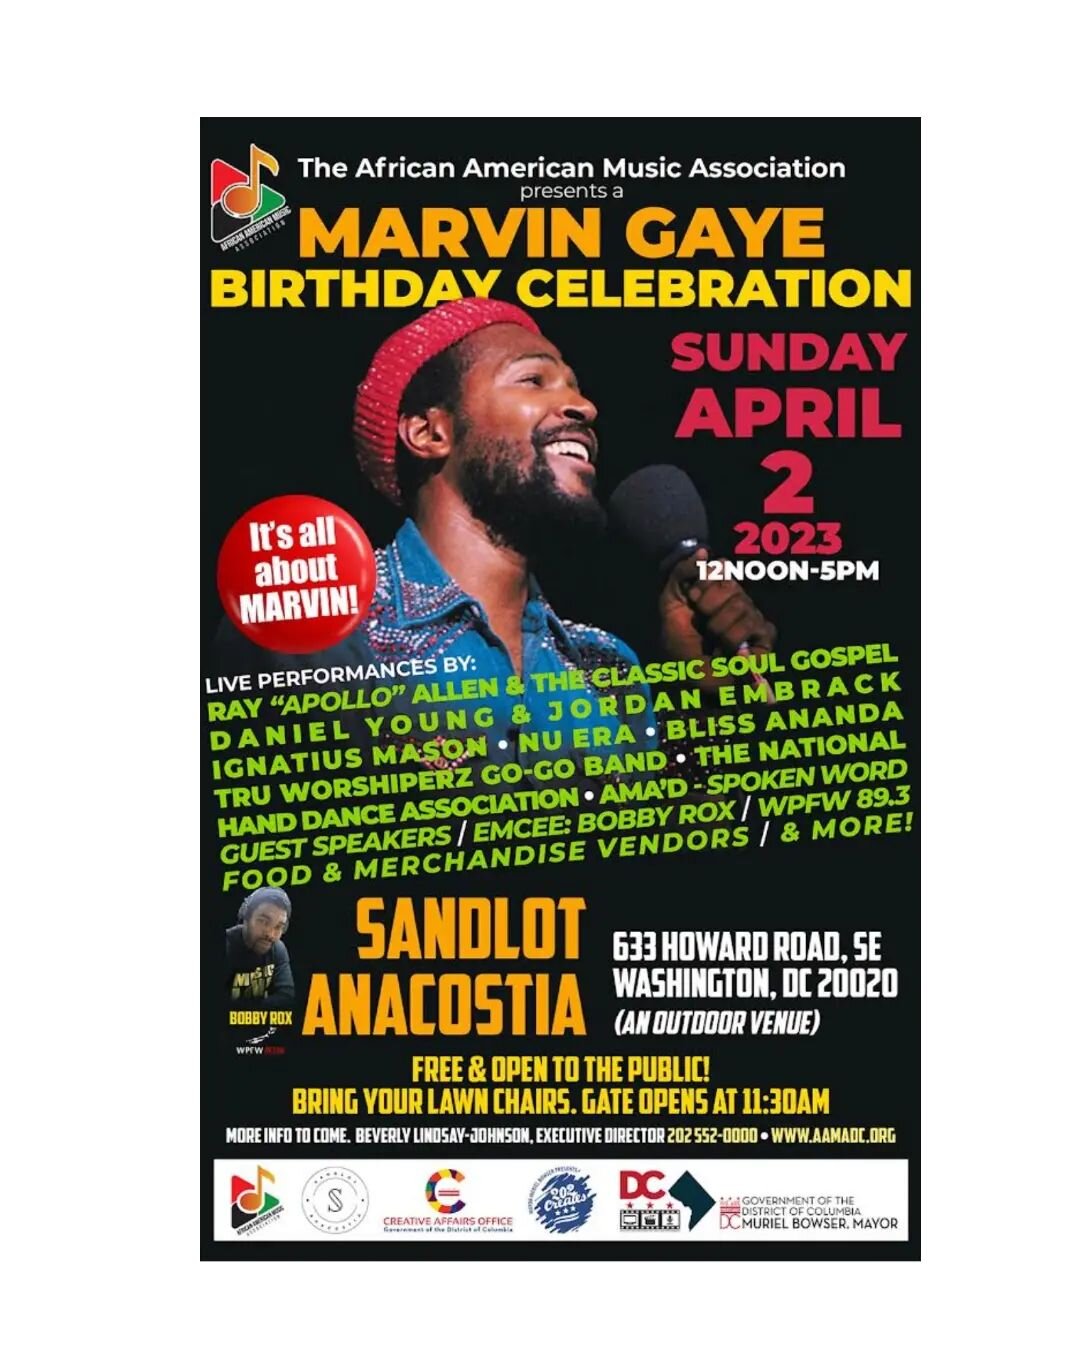 Greetings. 

Join us for a fun filled day 🎶 🍾celebrating one of my favorite artists of all times, Marvin Gaye! I am truly honored to be a part of this amazing organization presenting this historic event 🙏 See you tomorrow!